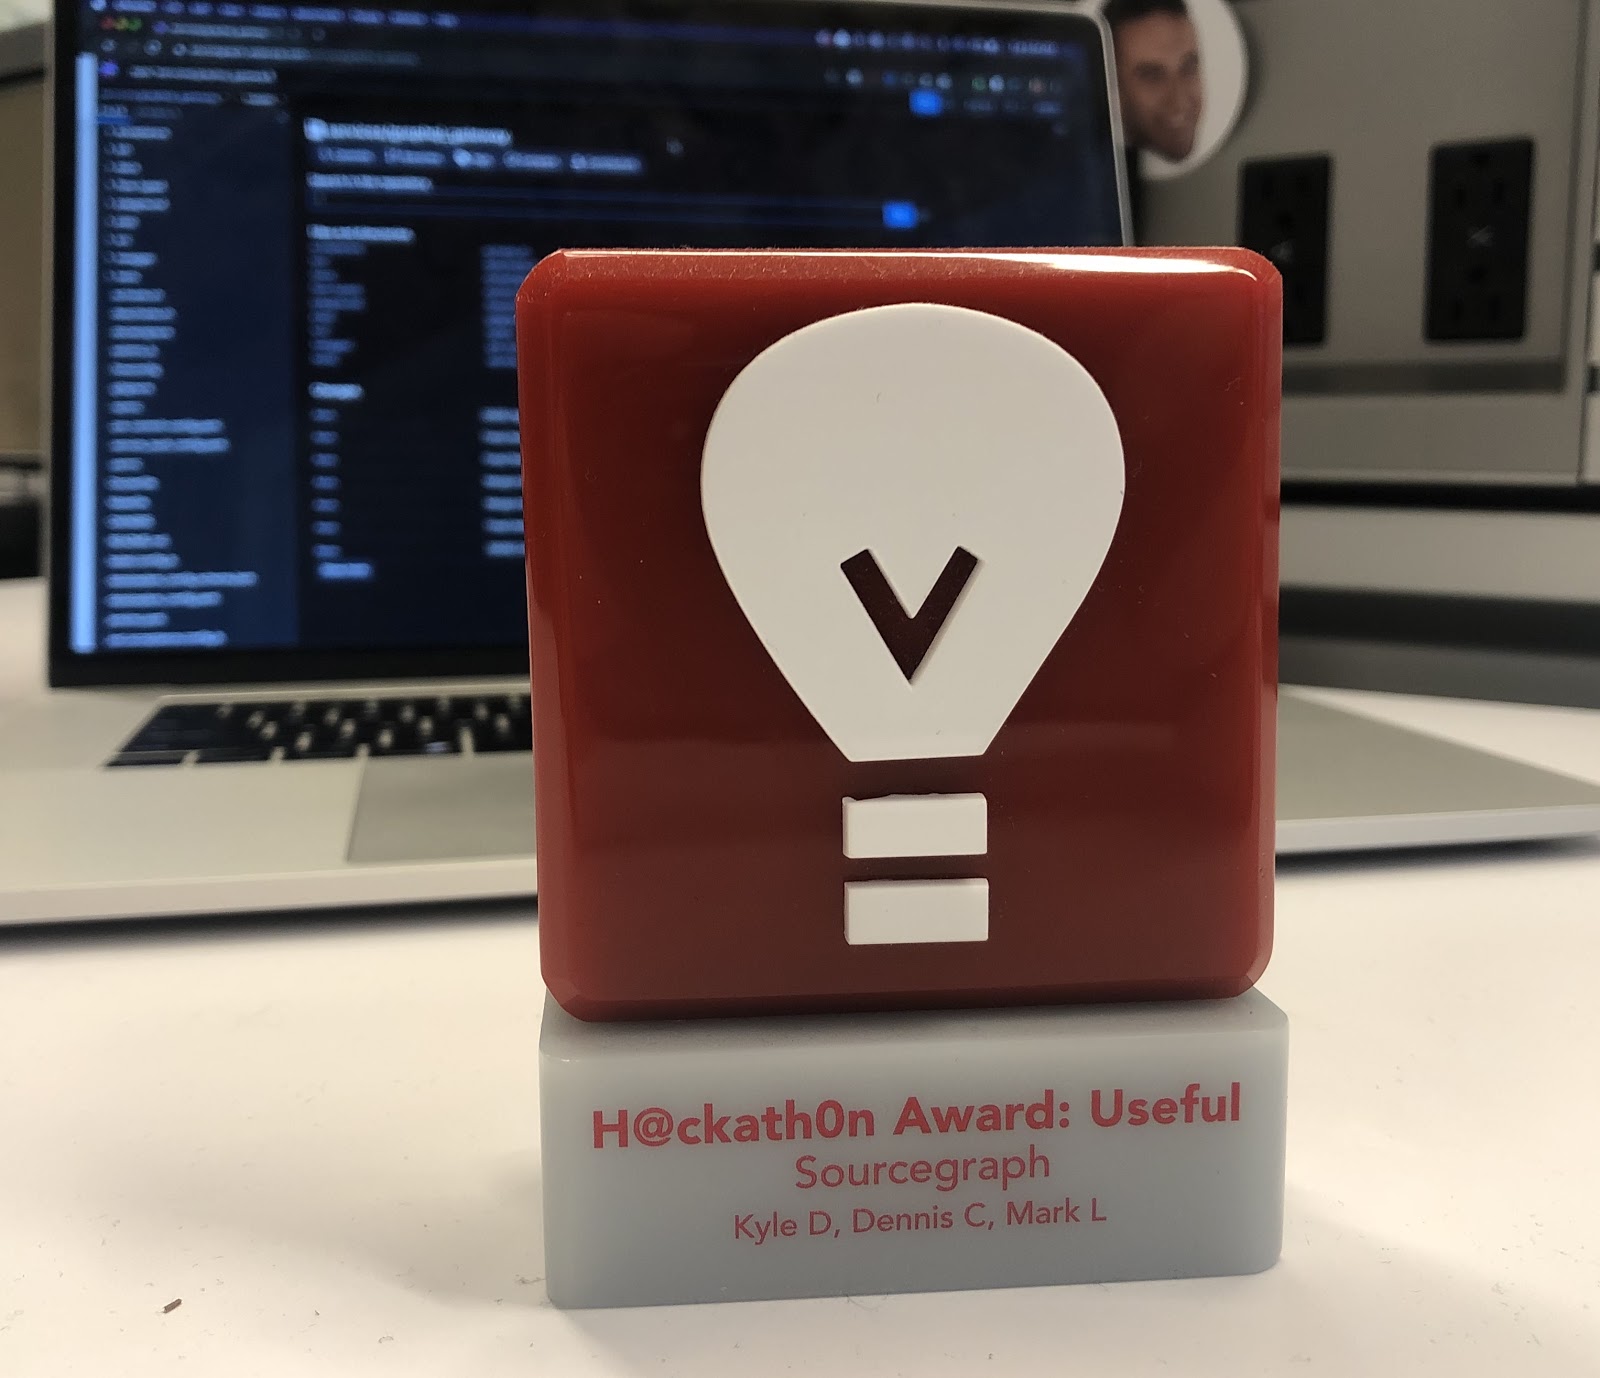 A coveted Hackathon trophy